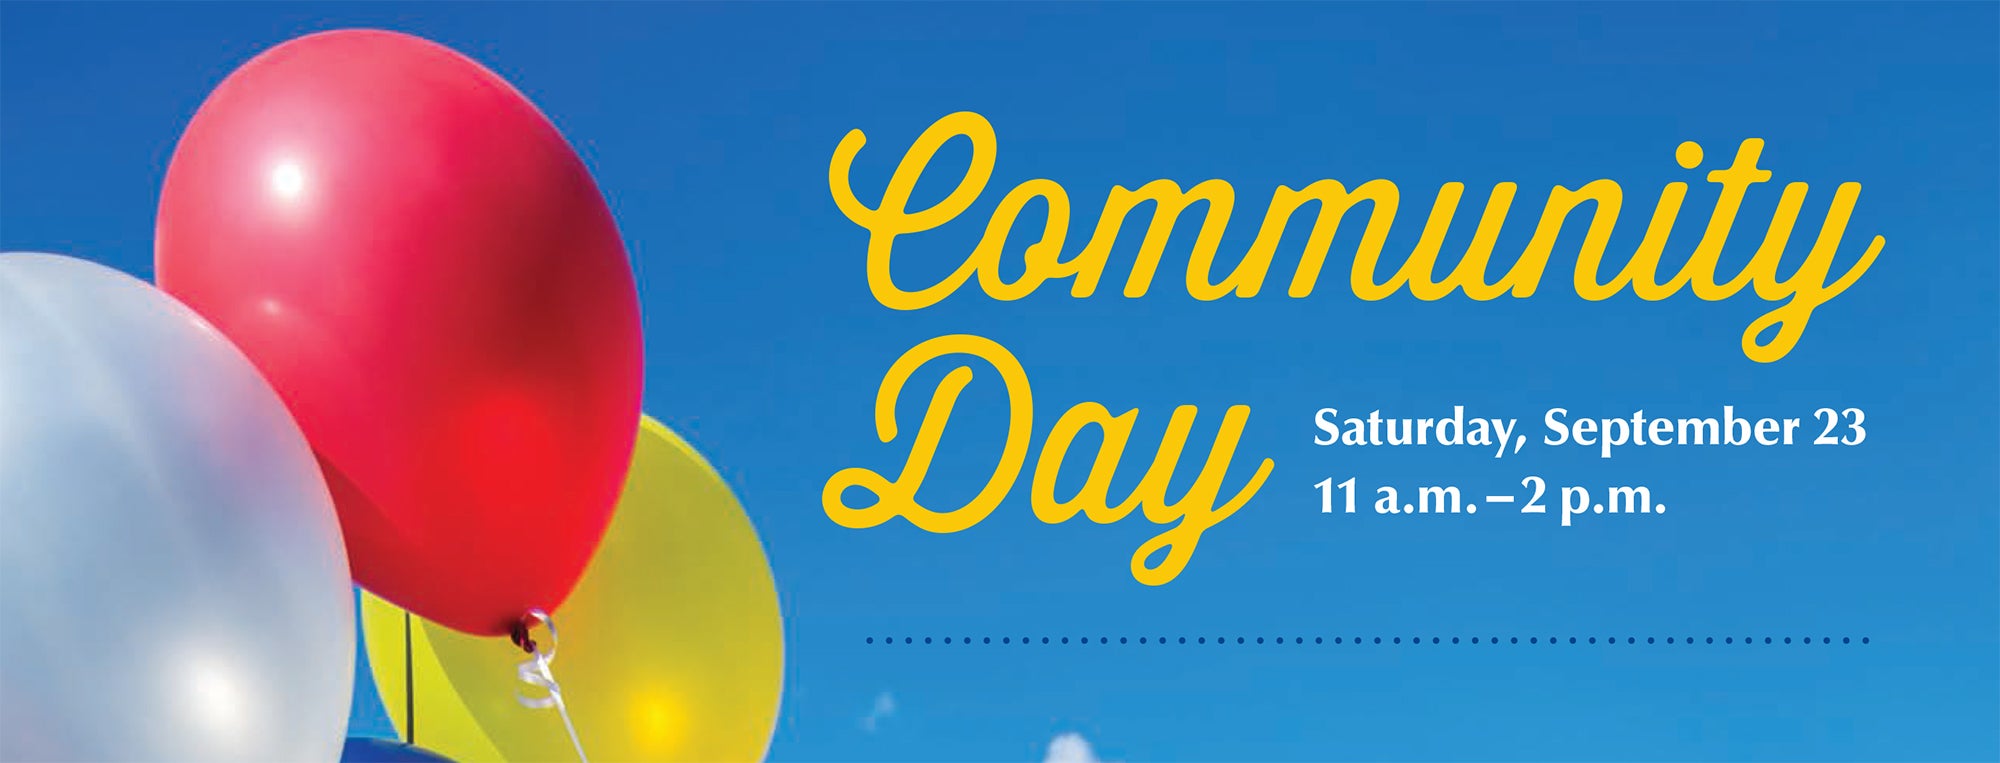 Community Day banner with balloons in the background.